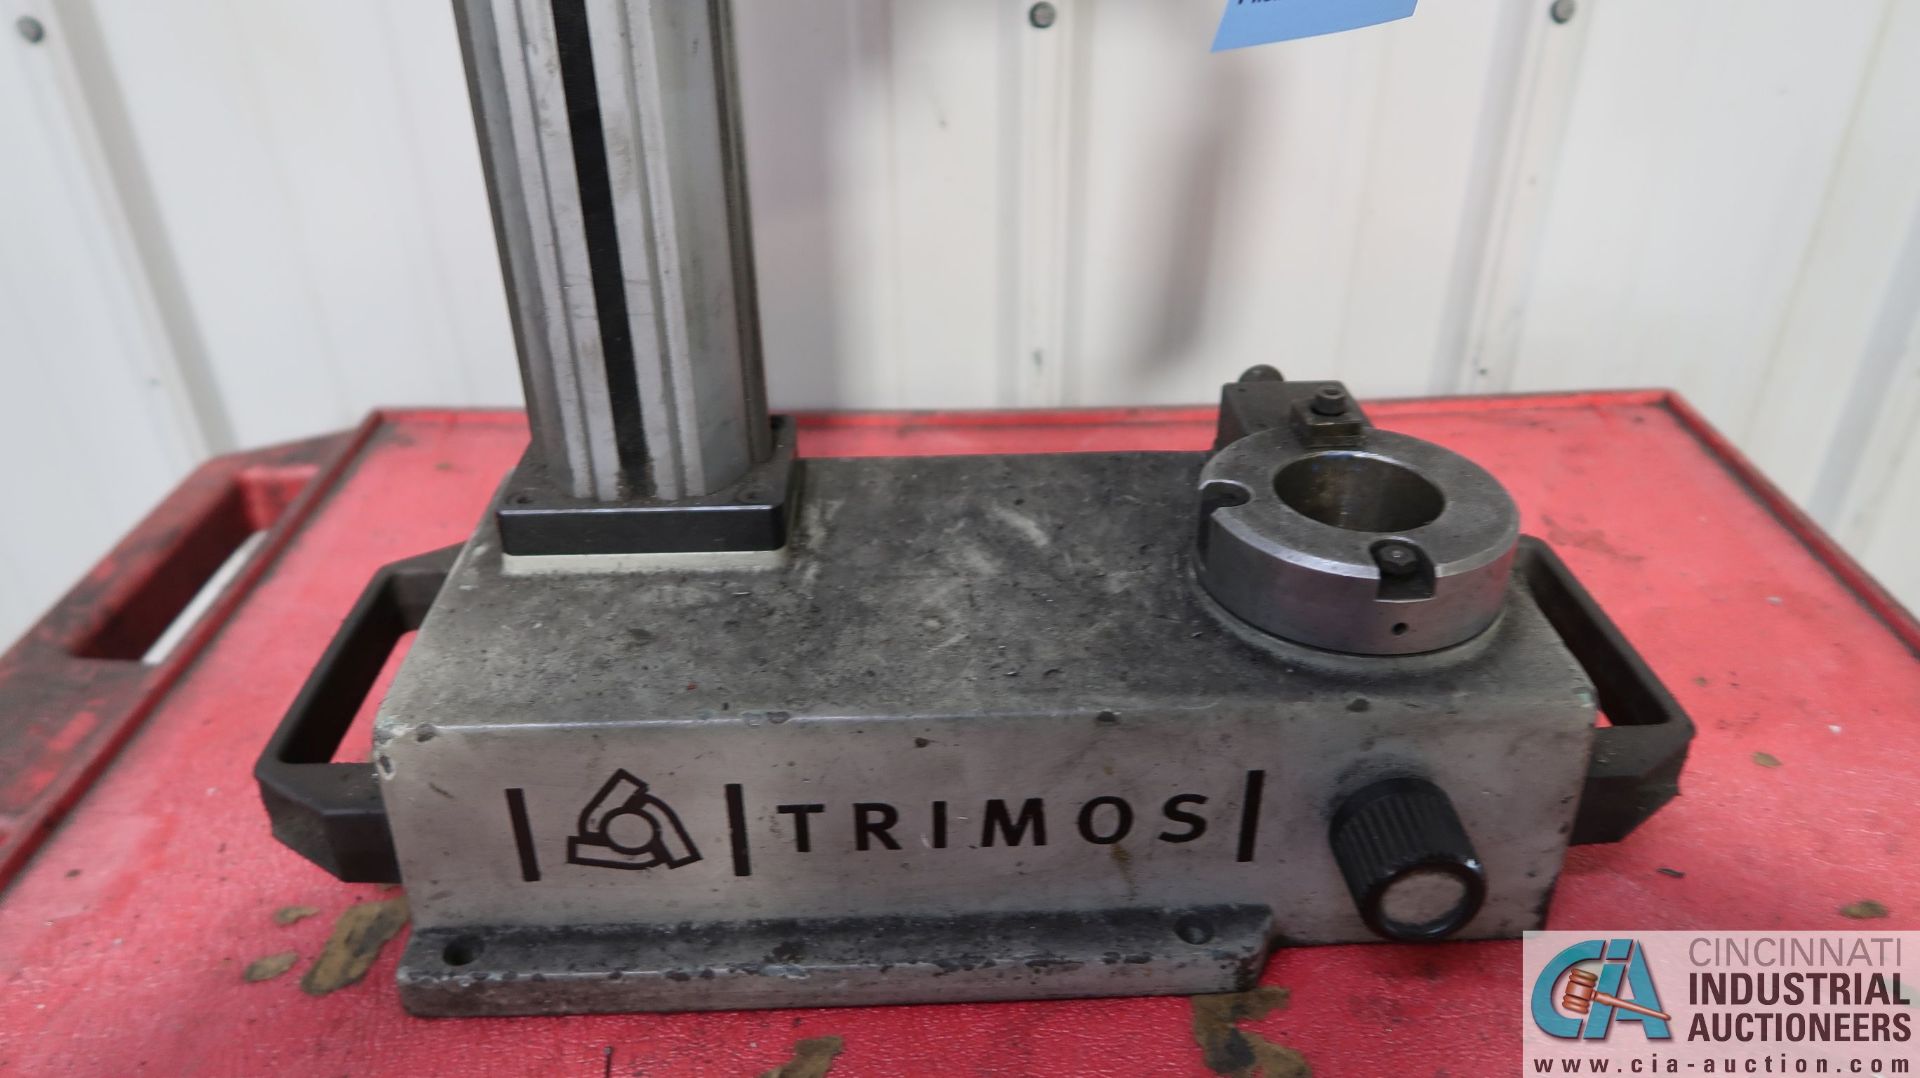 TRIMOS / FOWLER TYPE 7PR 301I9040 DRO TOOLSETTER; S/N 1518/ID:V-1/IT.1 - Image 3 of 3